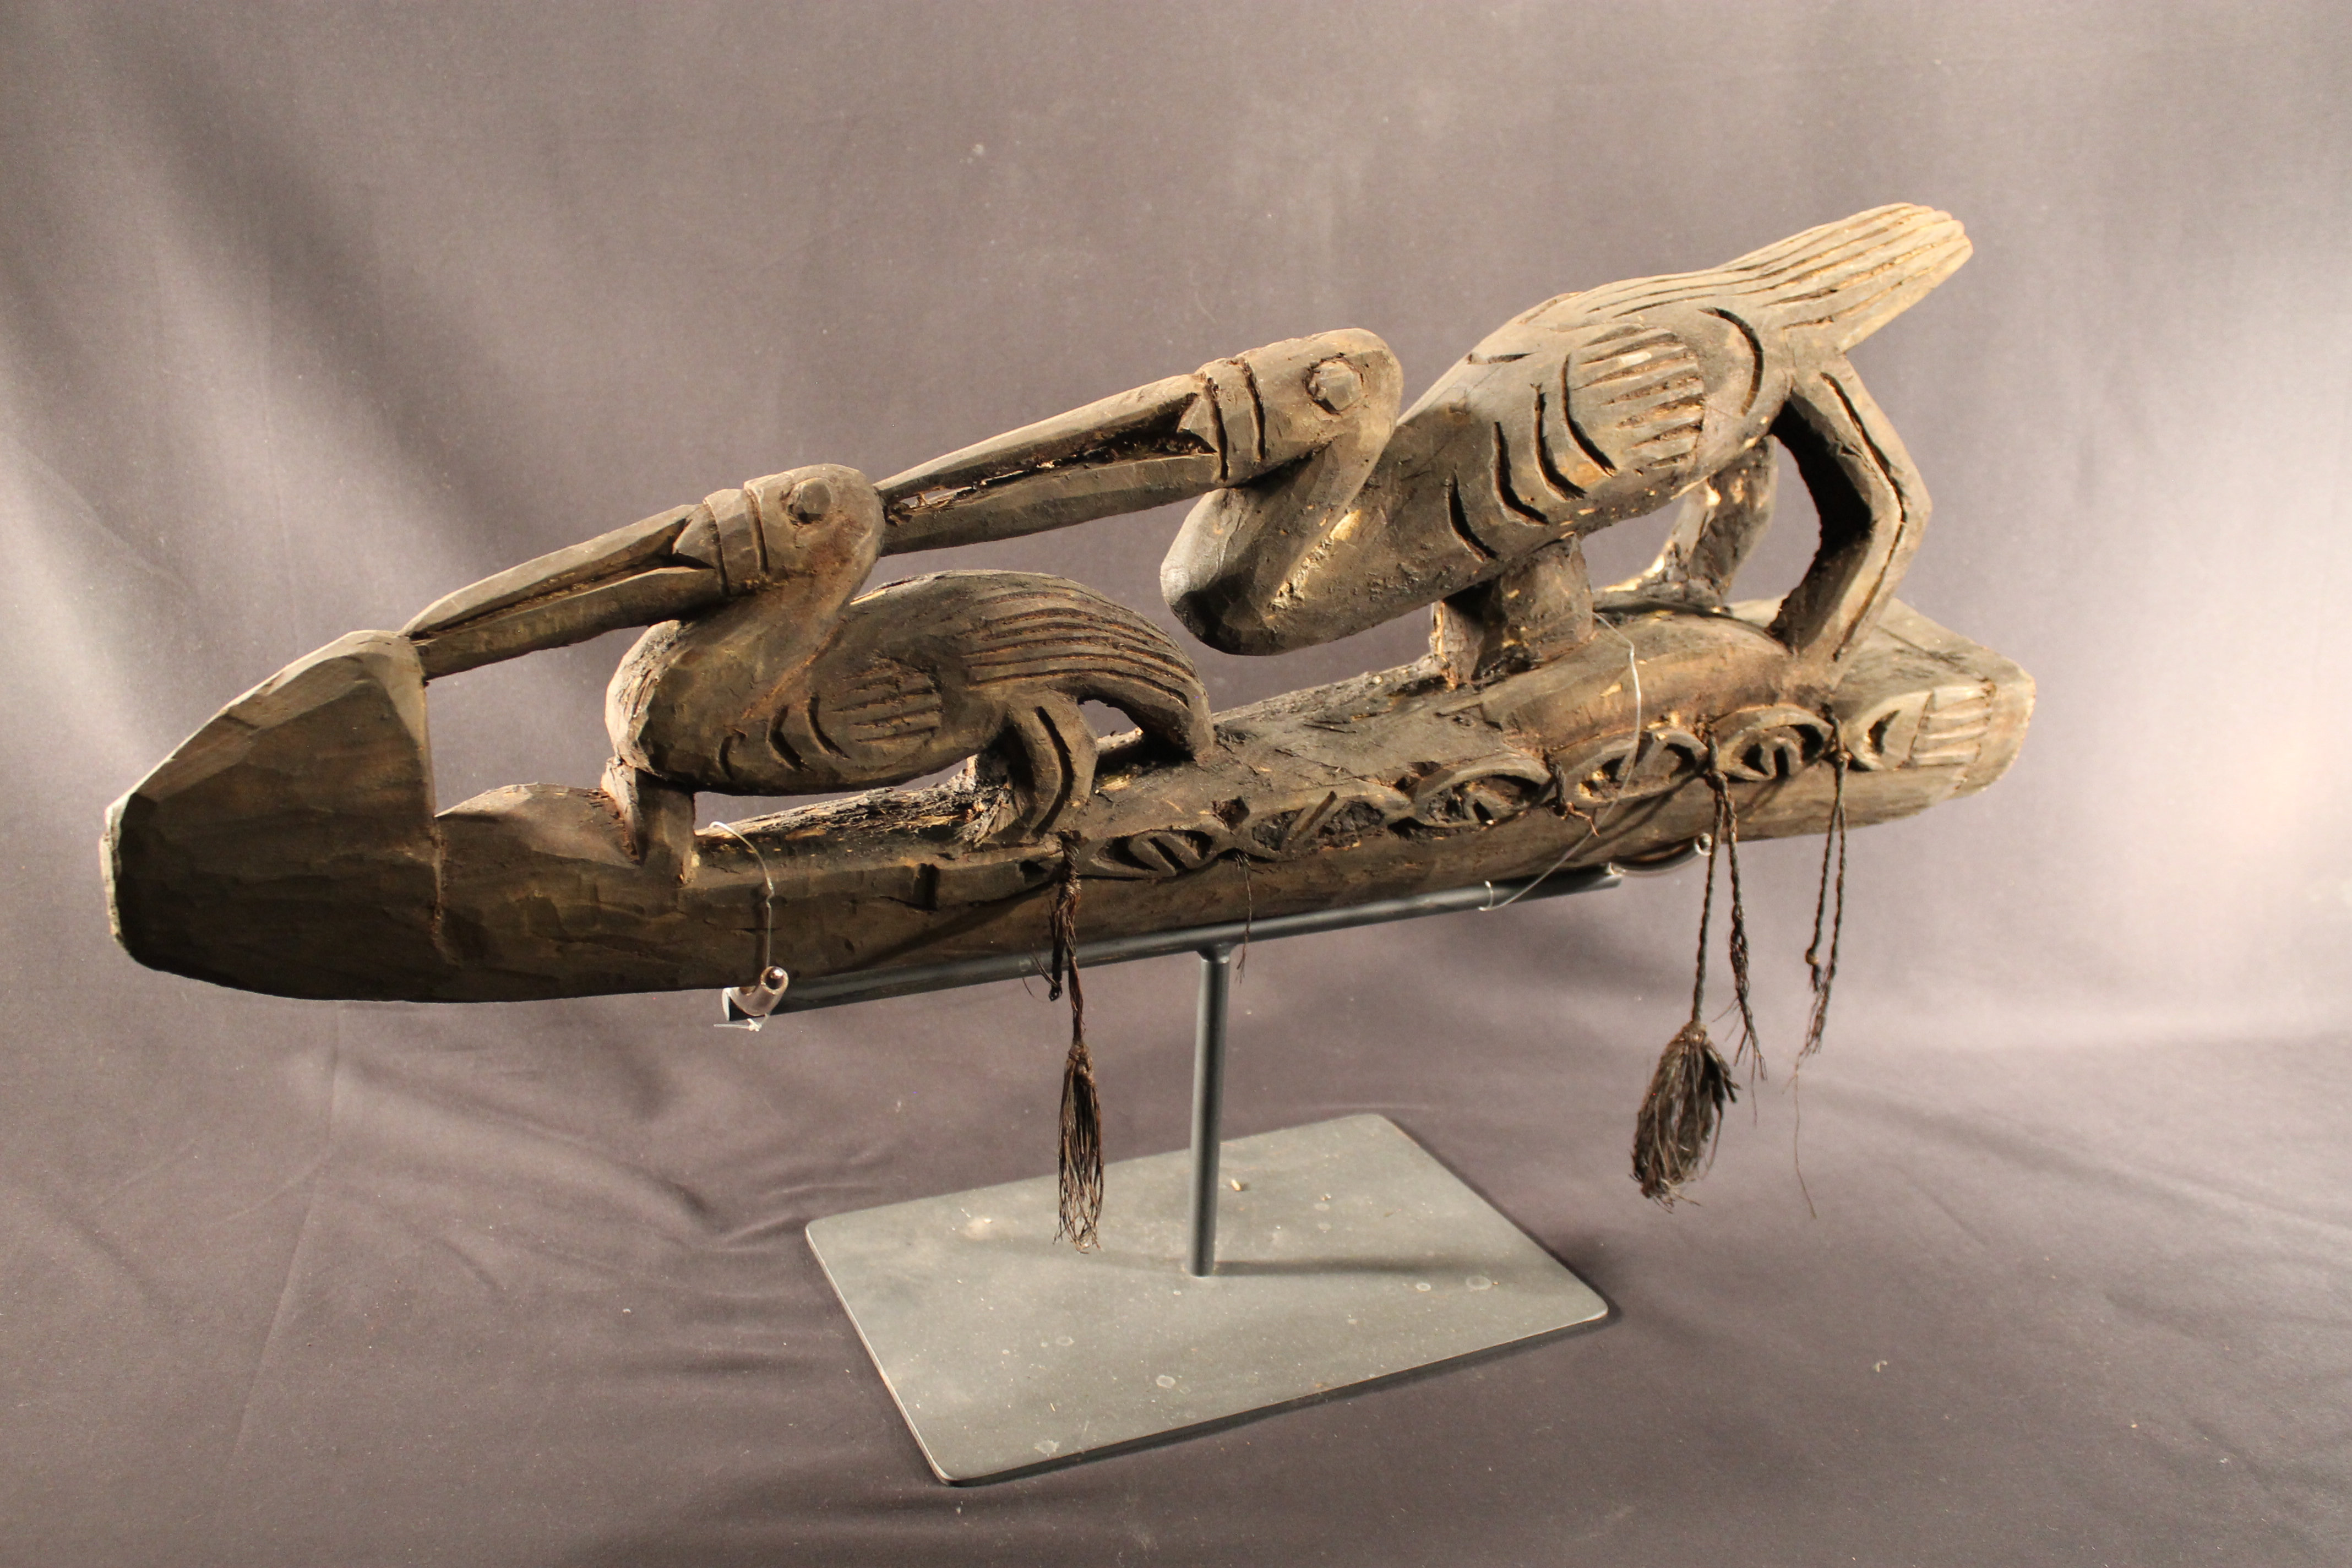 Wood carving depicting two pelicans. Tassels made of plant material connect to the side.